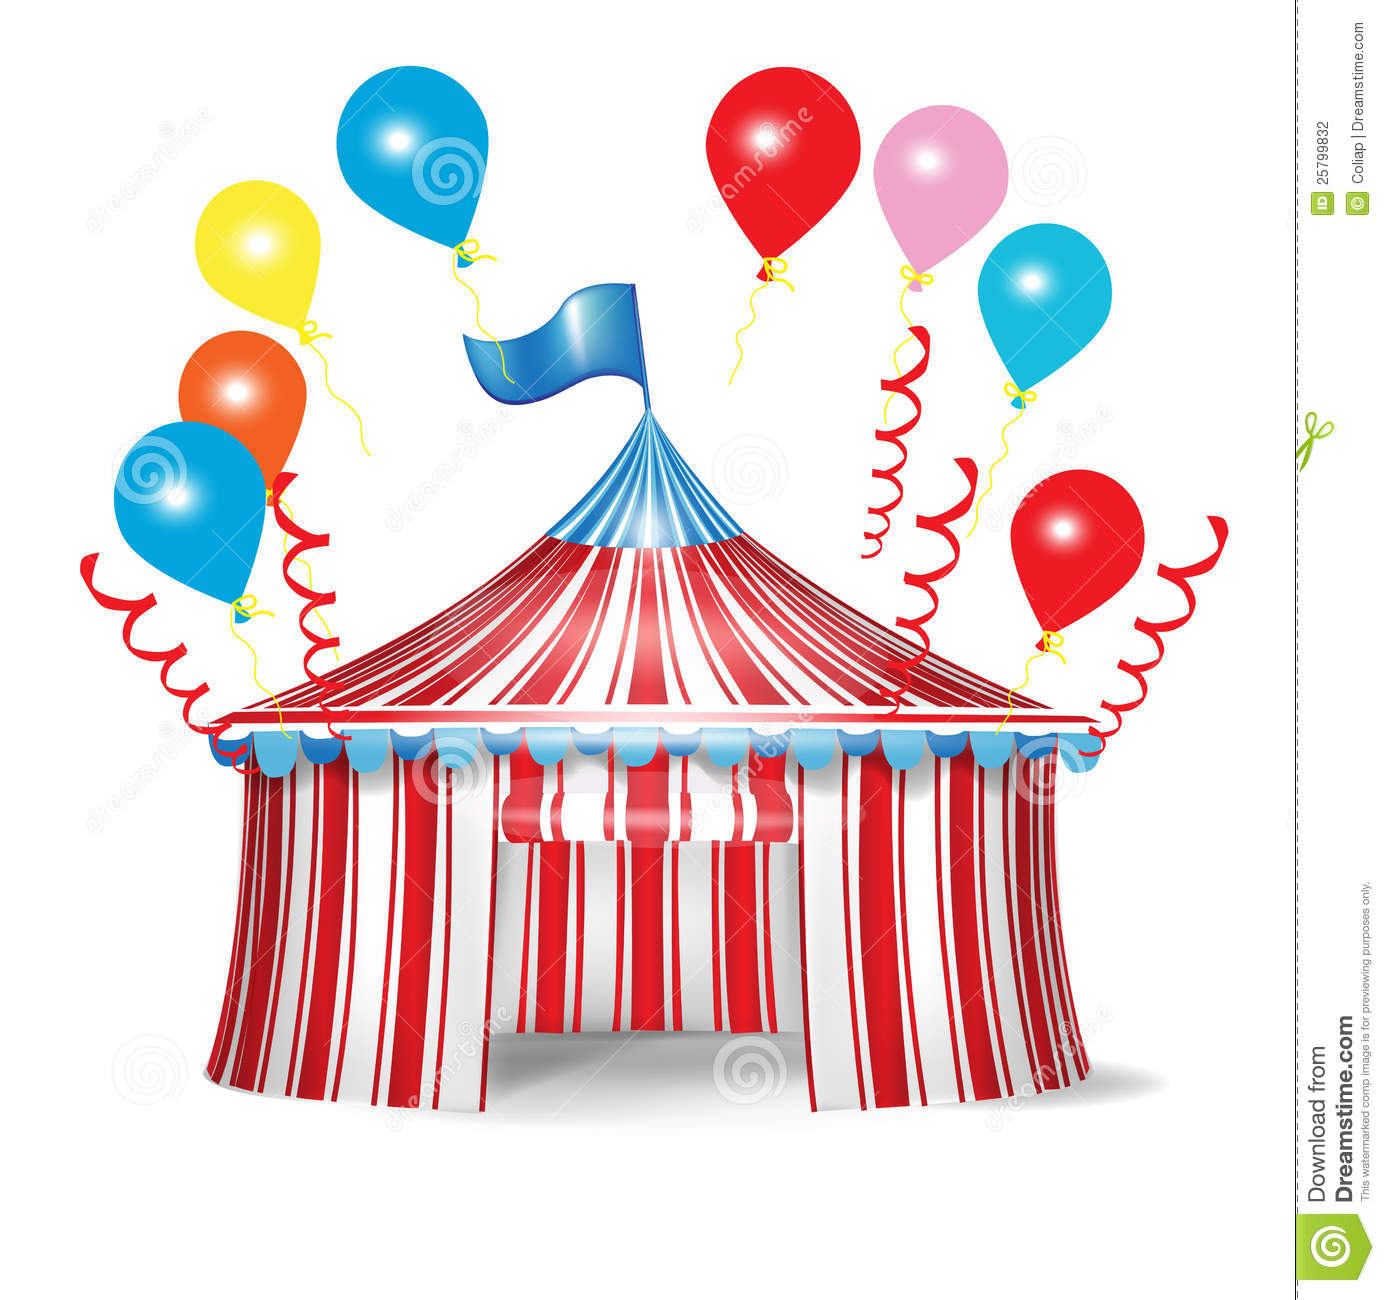 Circus Tent With Celebration Balloons Stock Photography   Image